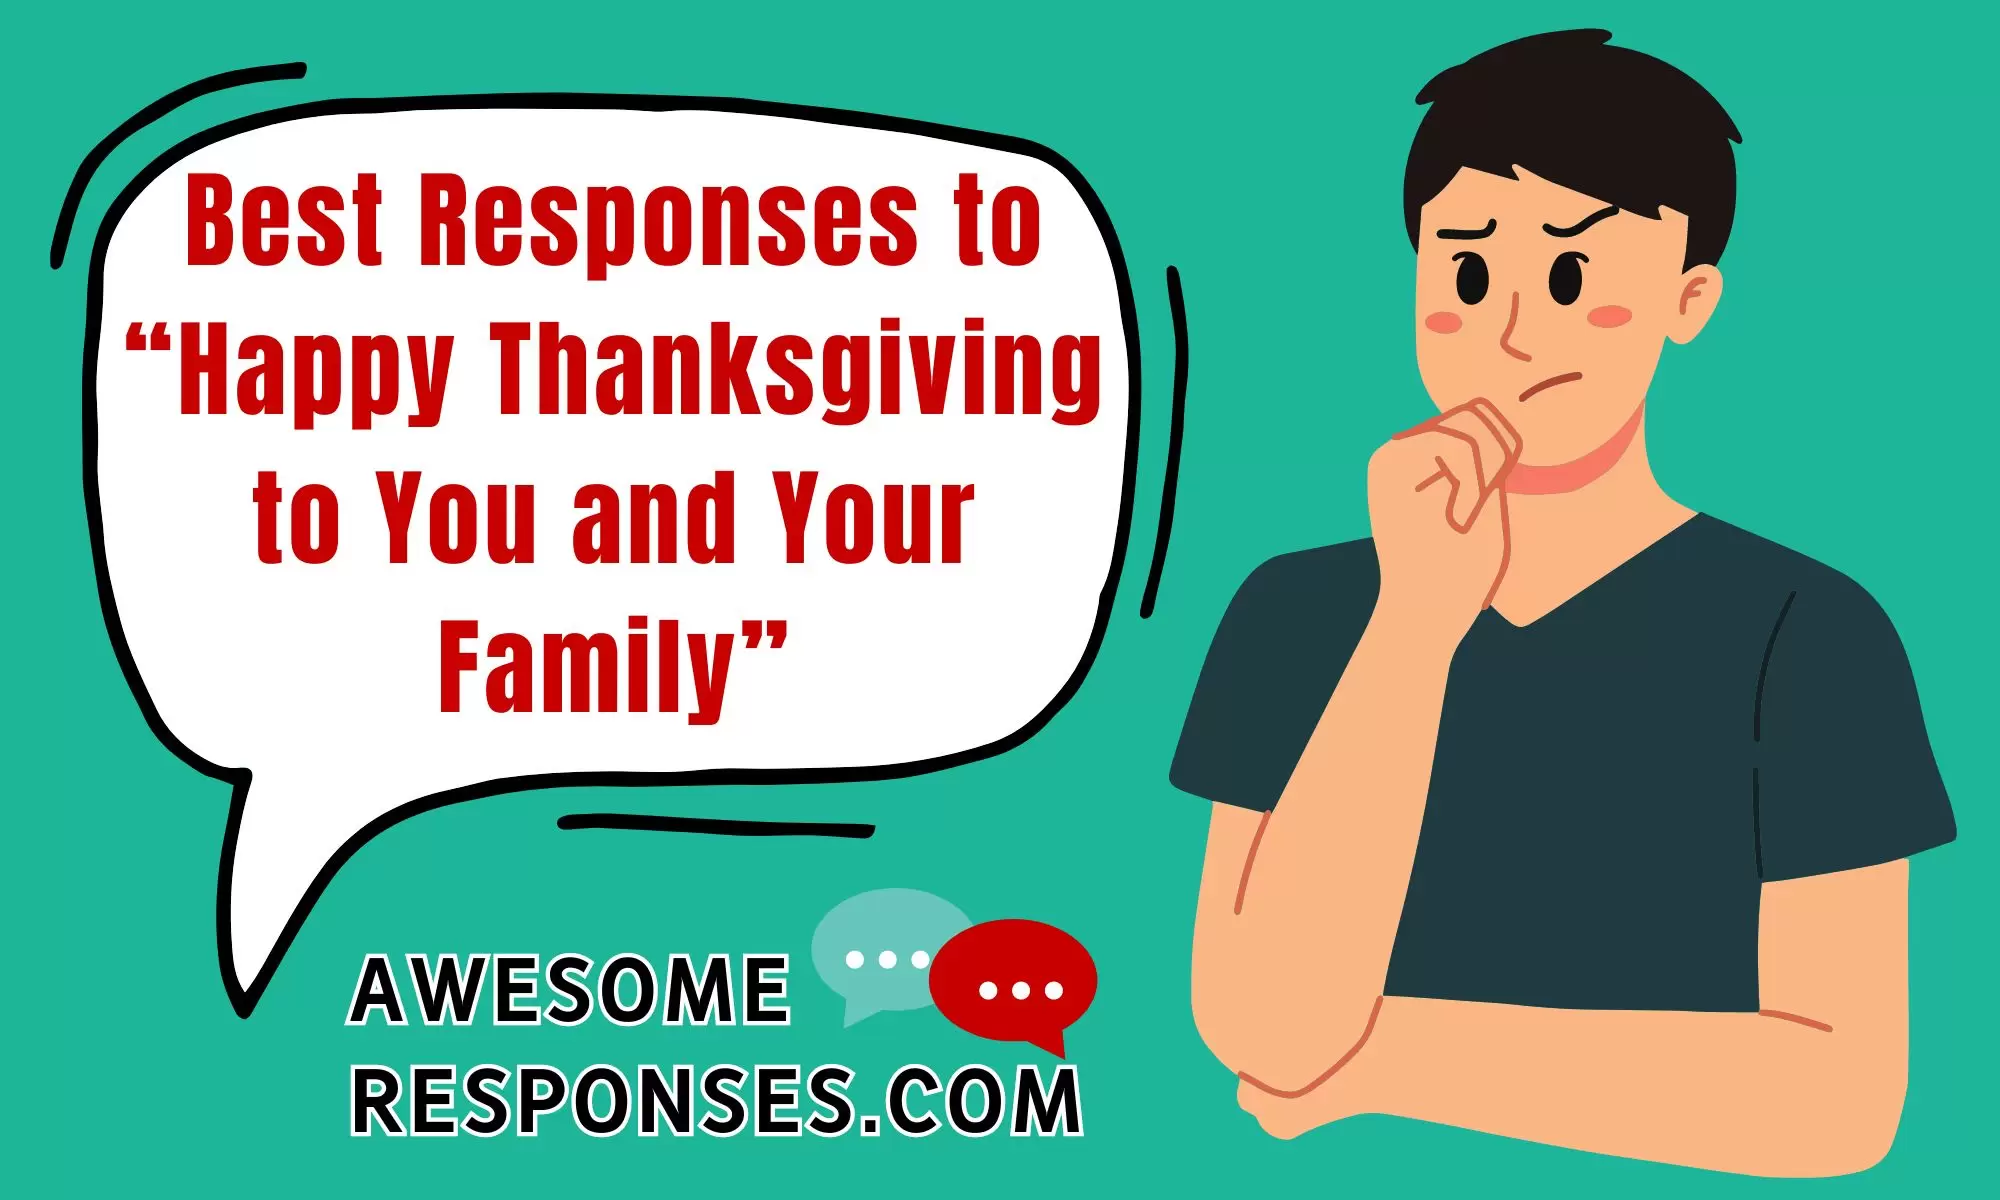 Best Responses to “Happy Thanksgiving to You and Your Family”